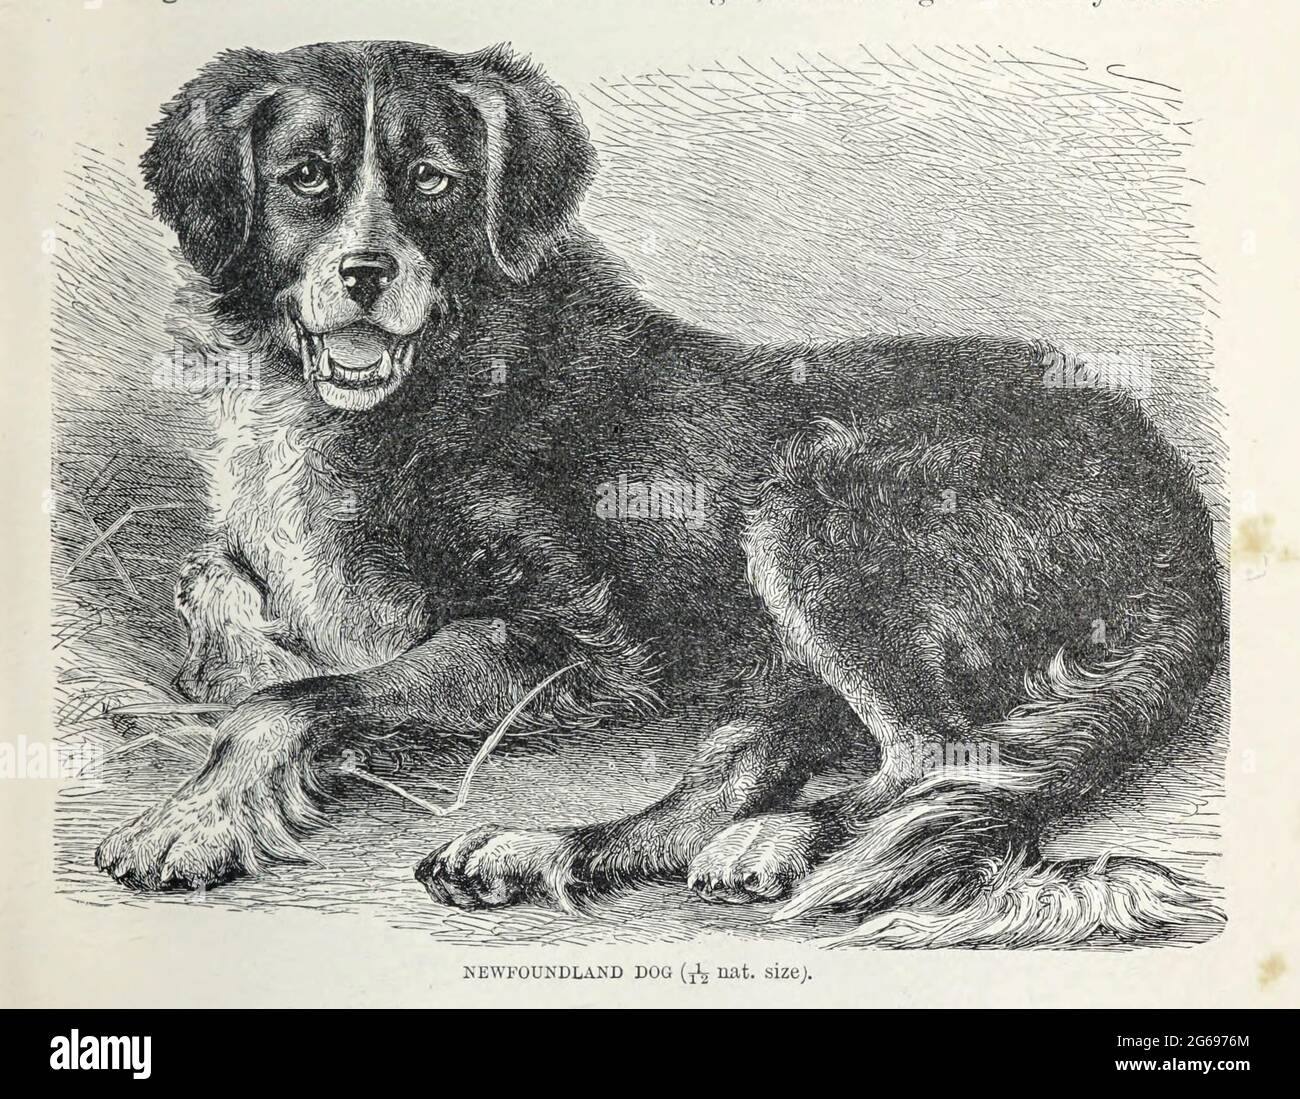 Newfoundland Dog From the book ' Royal Natural History ' Volume 1 Section II Edited by  Richard Lydekker, Published in London by Frederick Warne & Co in 1893-1894 Stock Photo